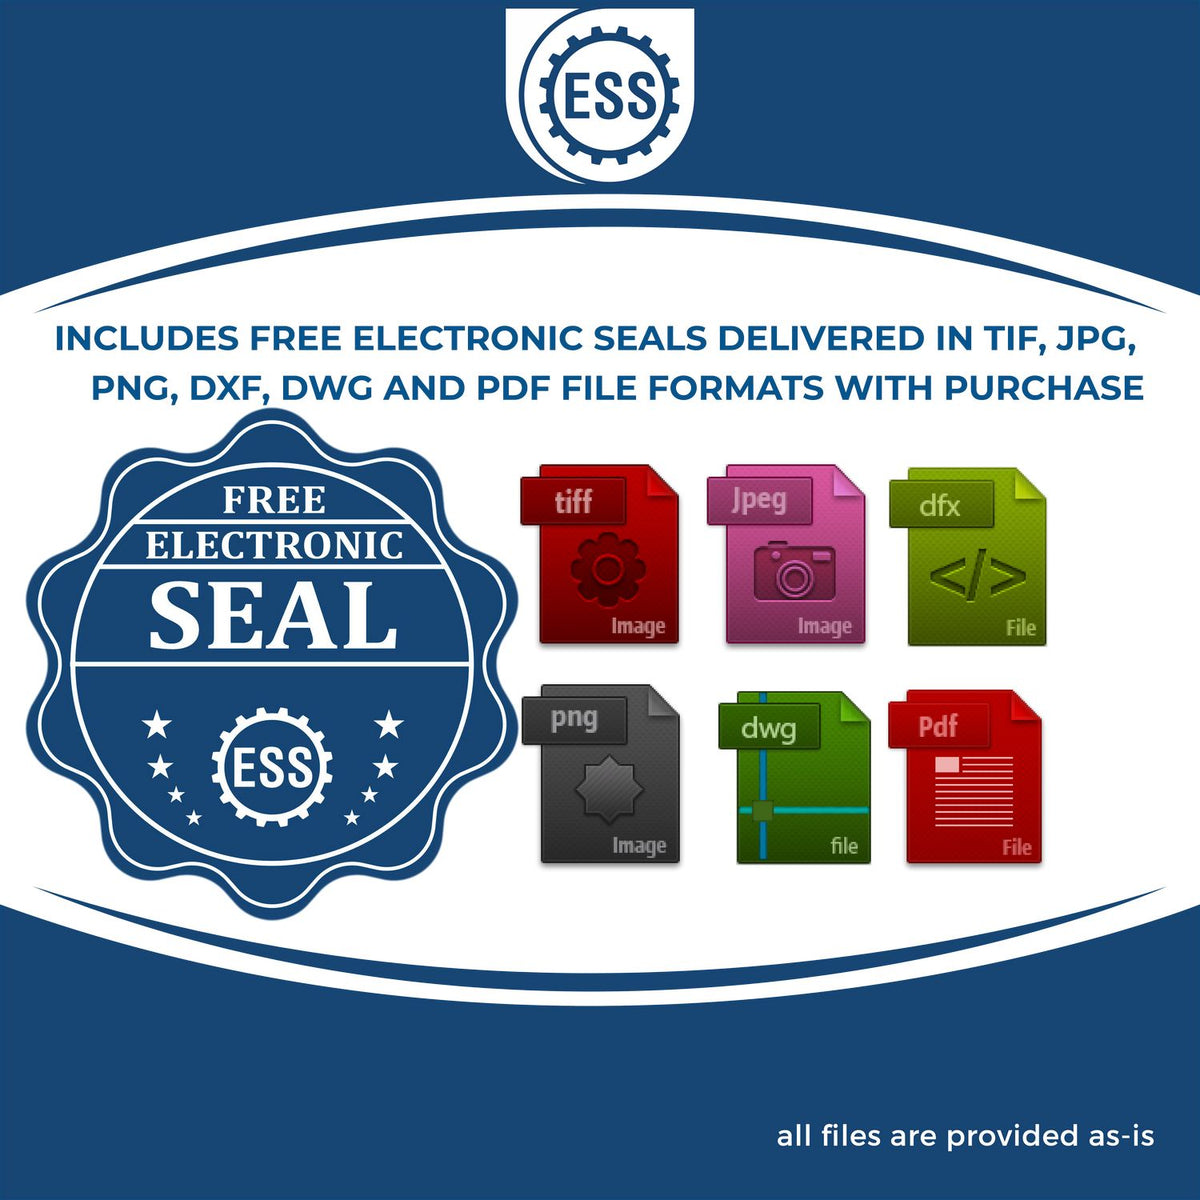 An infographic for the free electronic seal for the Premium MaxLight Pre-Inked Rhode Is Landscape Architects Stamp illustrating the different file type icons such as DXF, DWG, TIF, JPG and PNG.